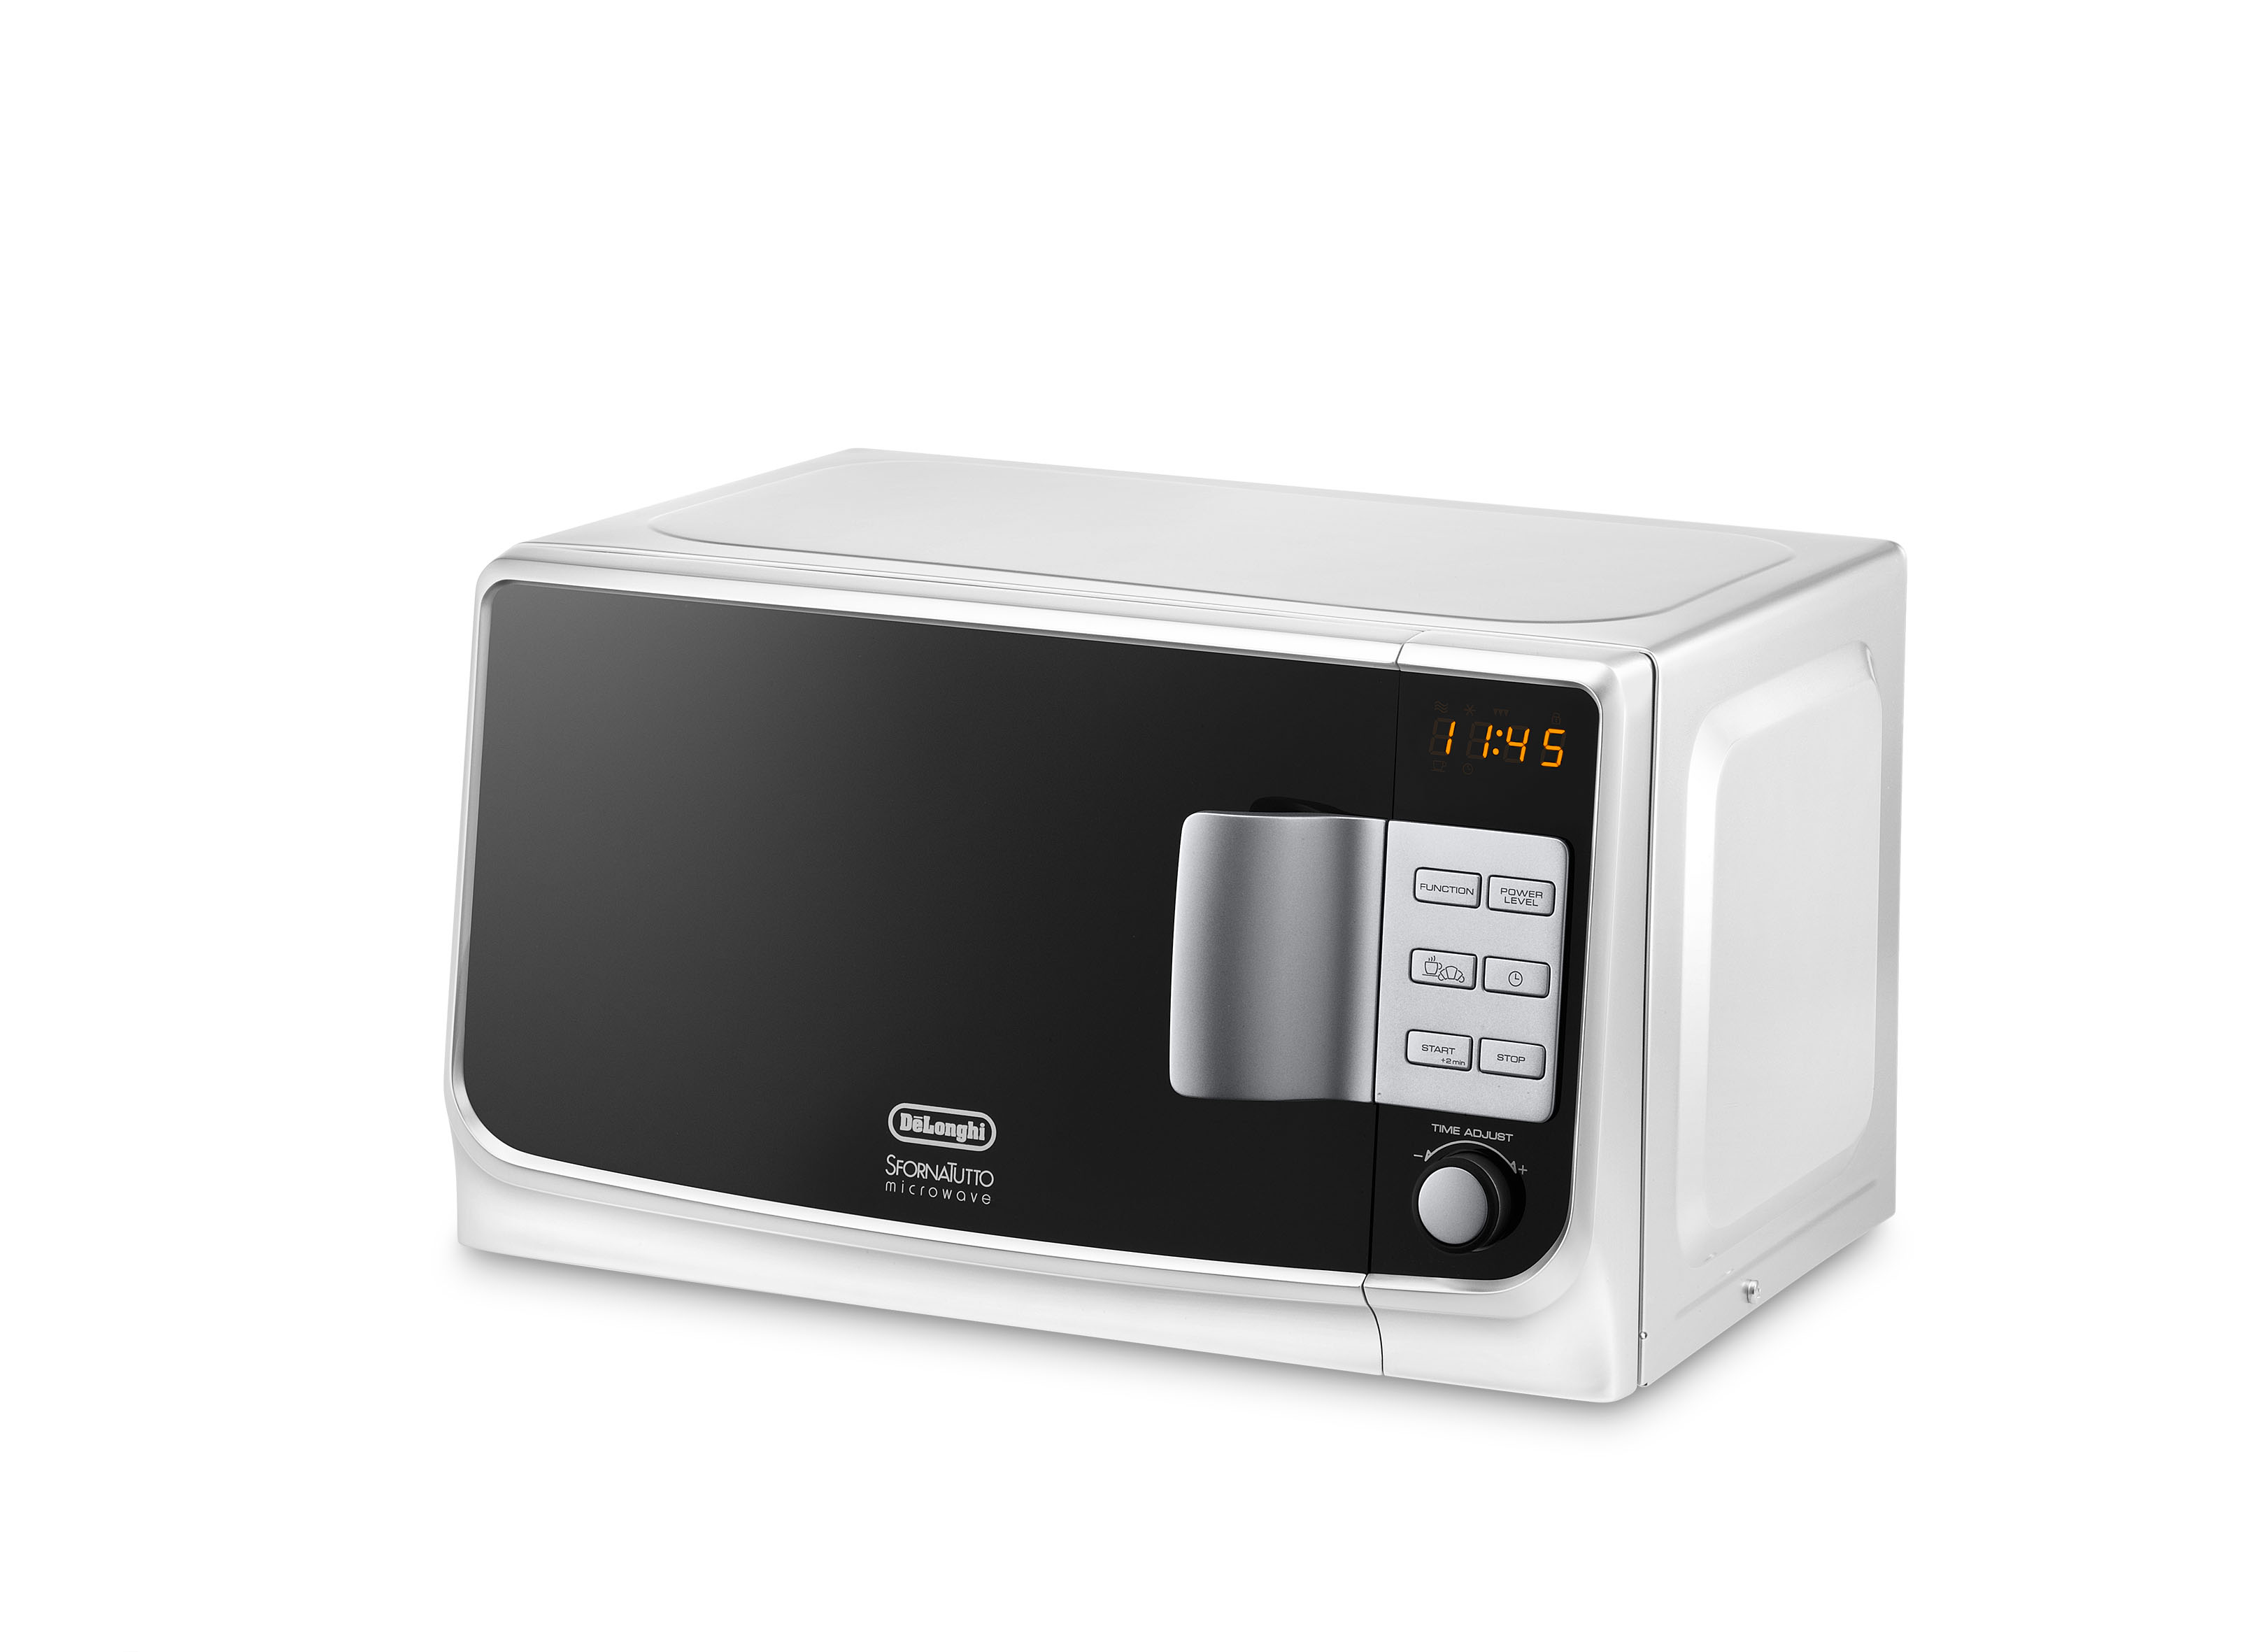 DELONGHI MW 20 G, Mikrowelle (Grillfunktion)